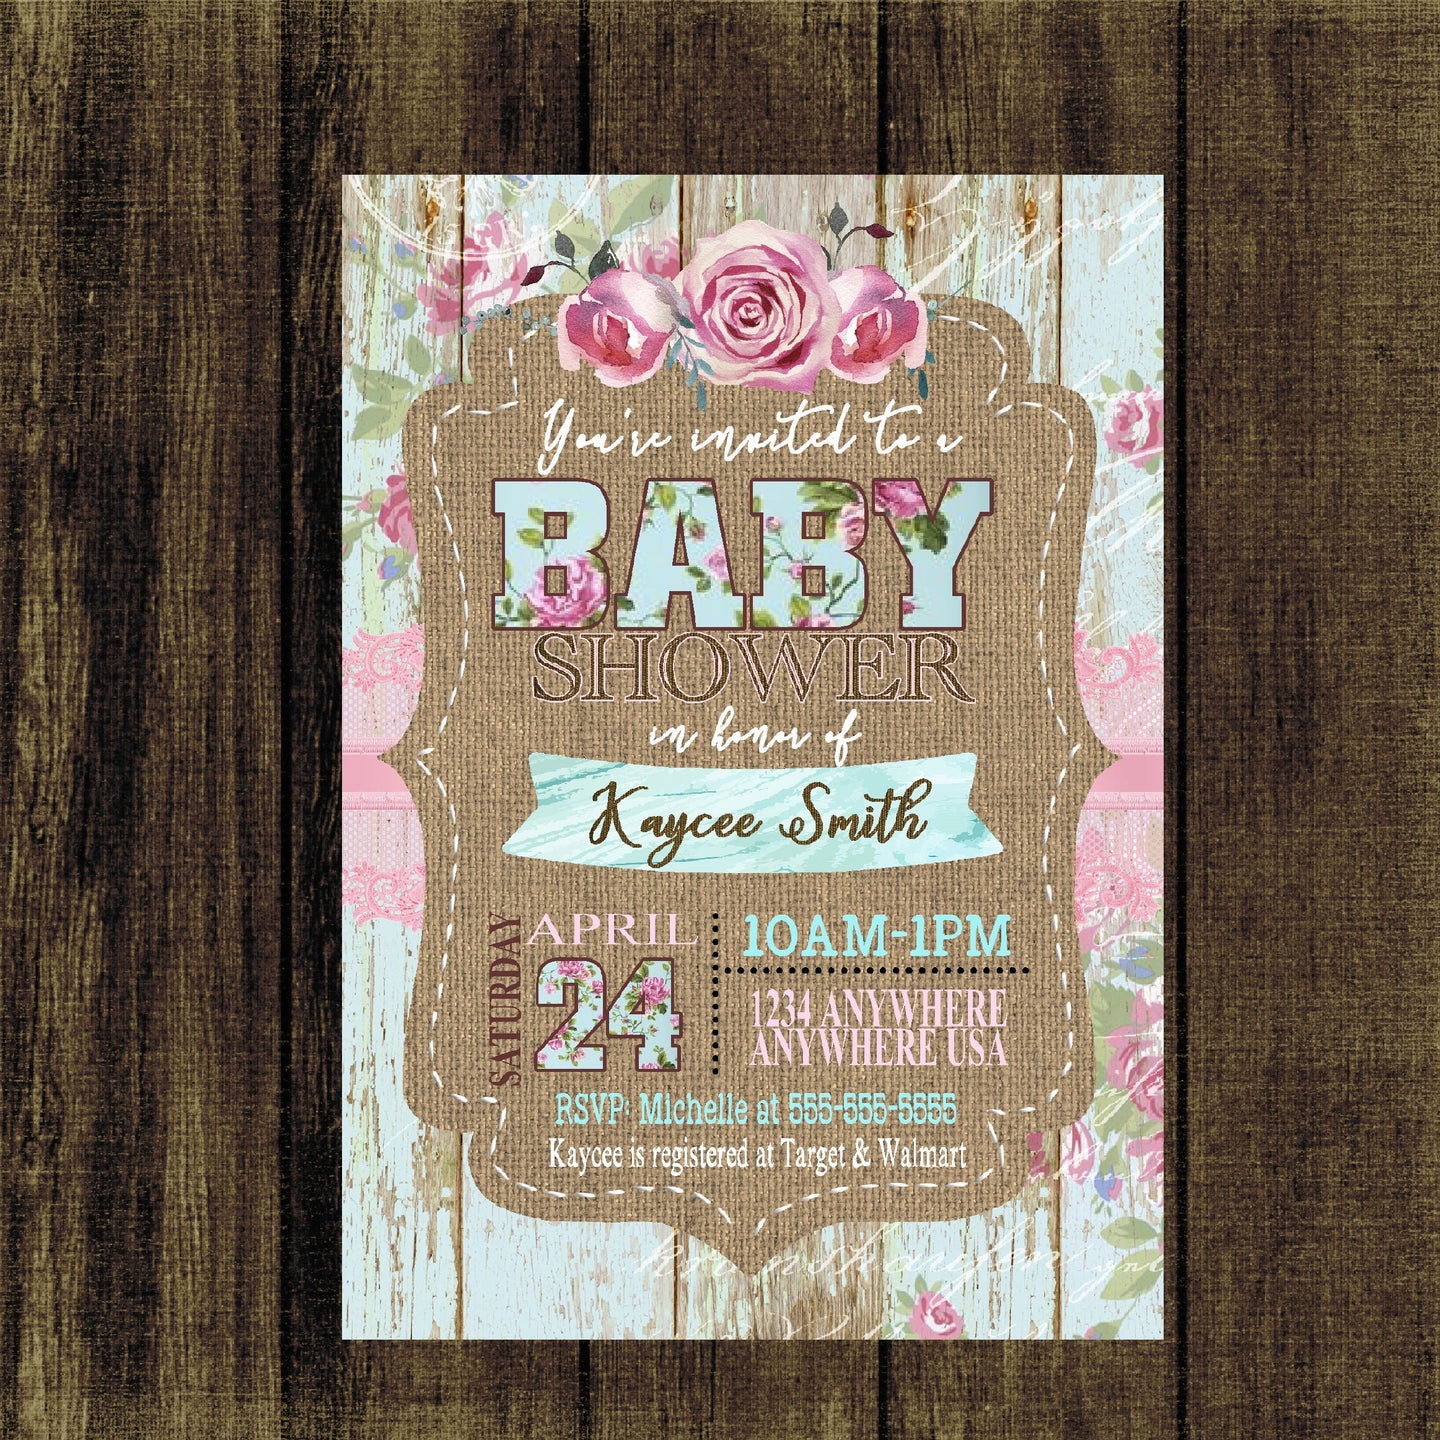 Shabby Chic BABY SHOWER Invitation, Rose Floral, Rustic, Wood  Baby Shower Invitation, Vintage Baby shower invitation, Invite, Burlap Lace